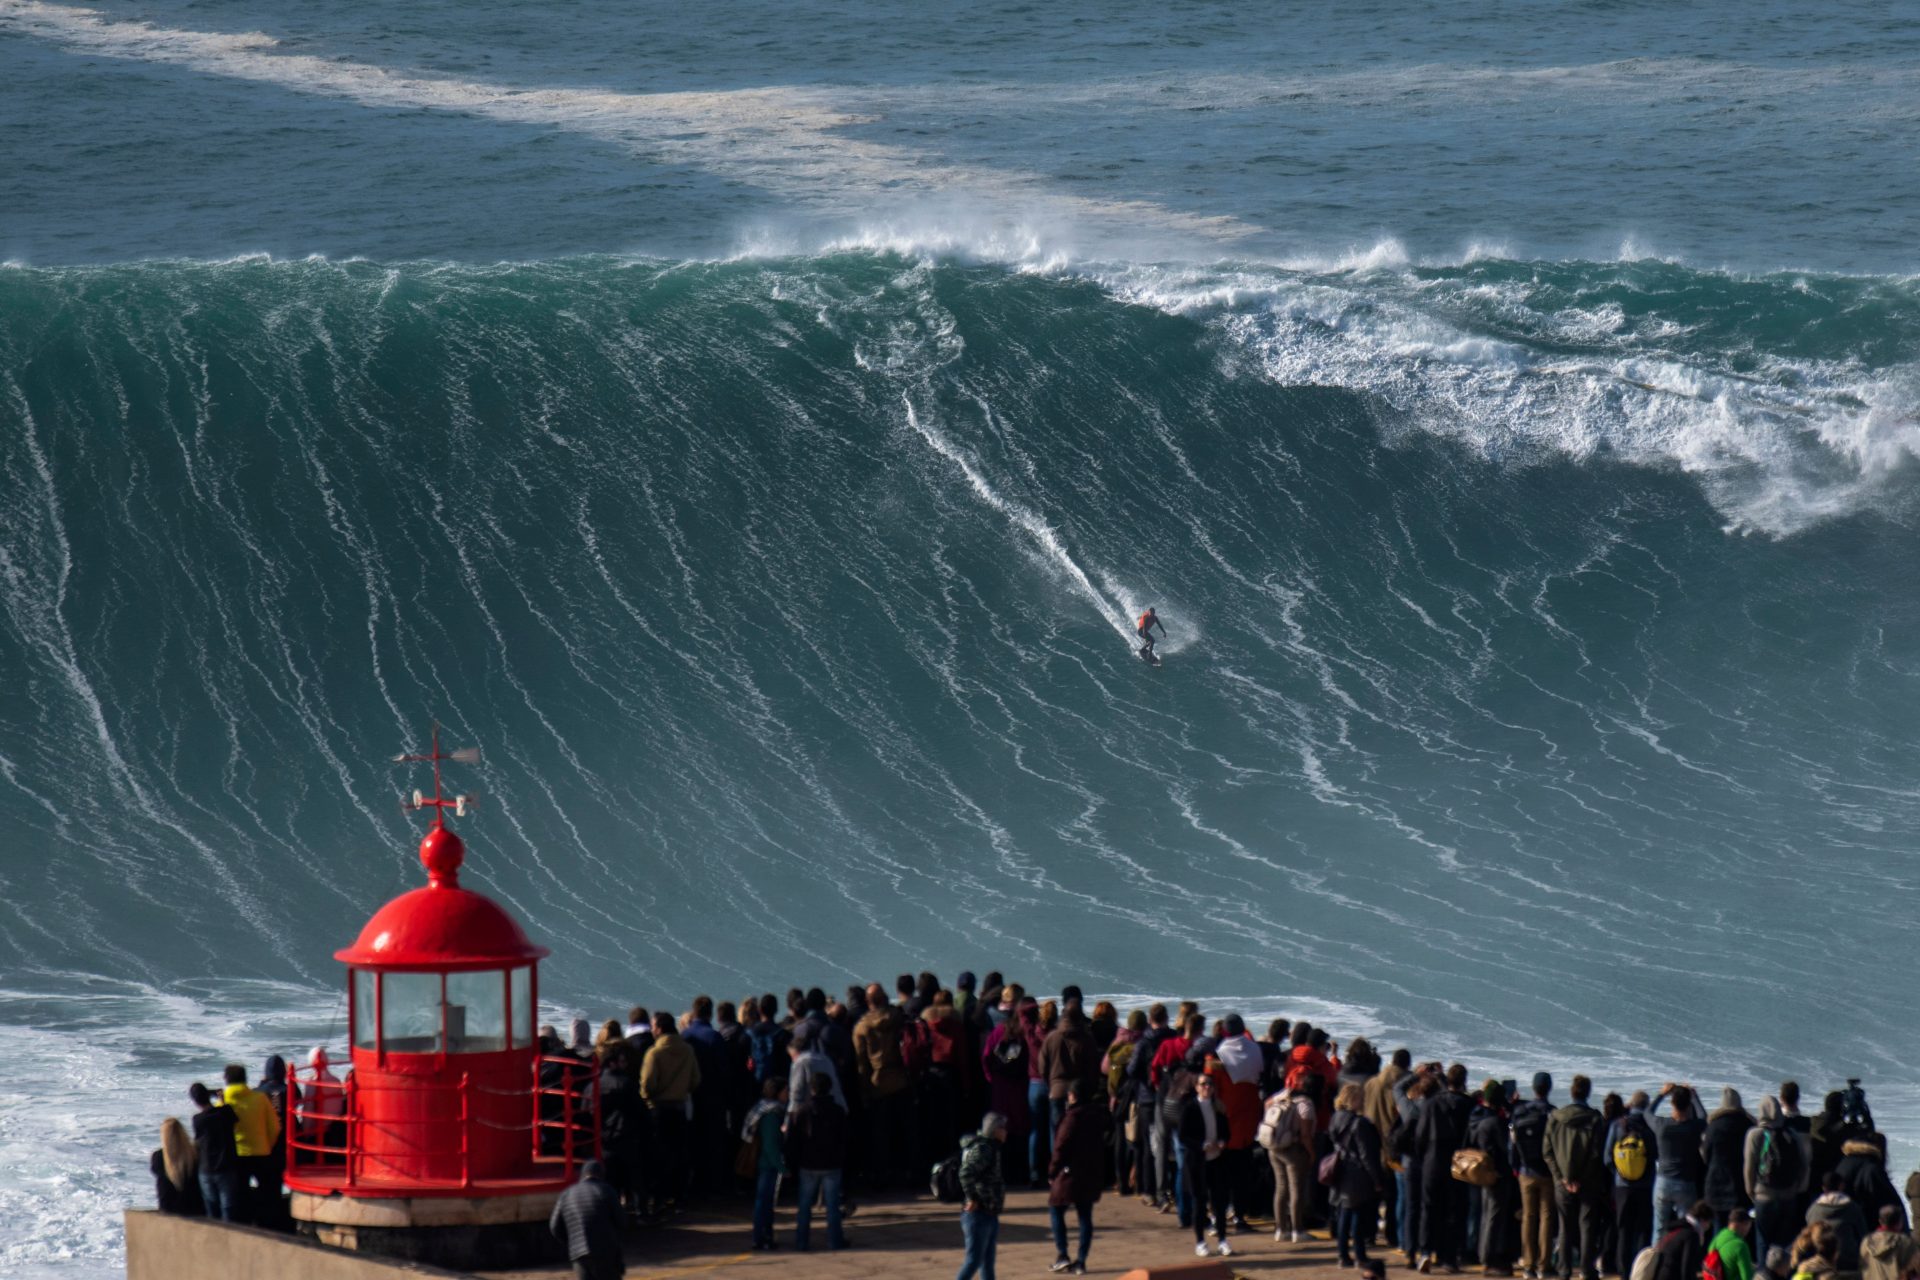 Riding Giants: Surfing big waves at Nazaré